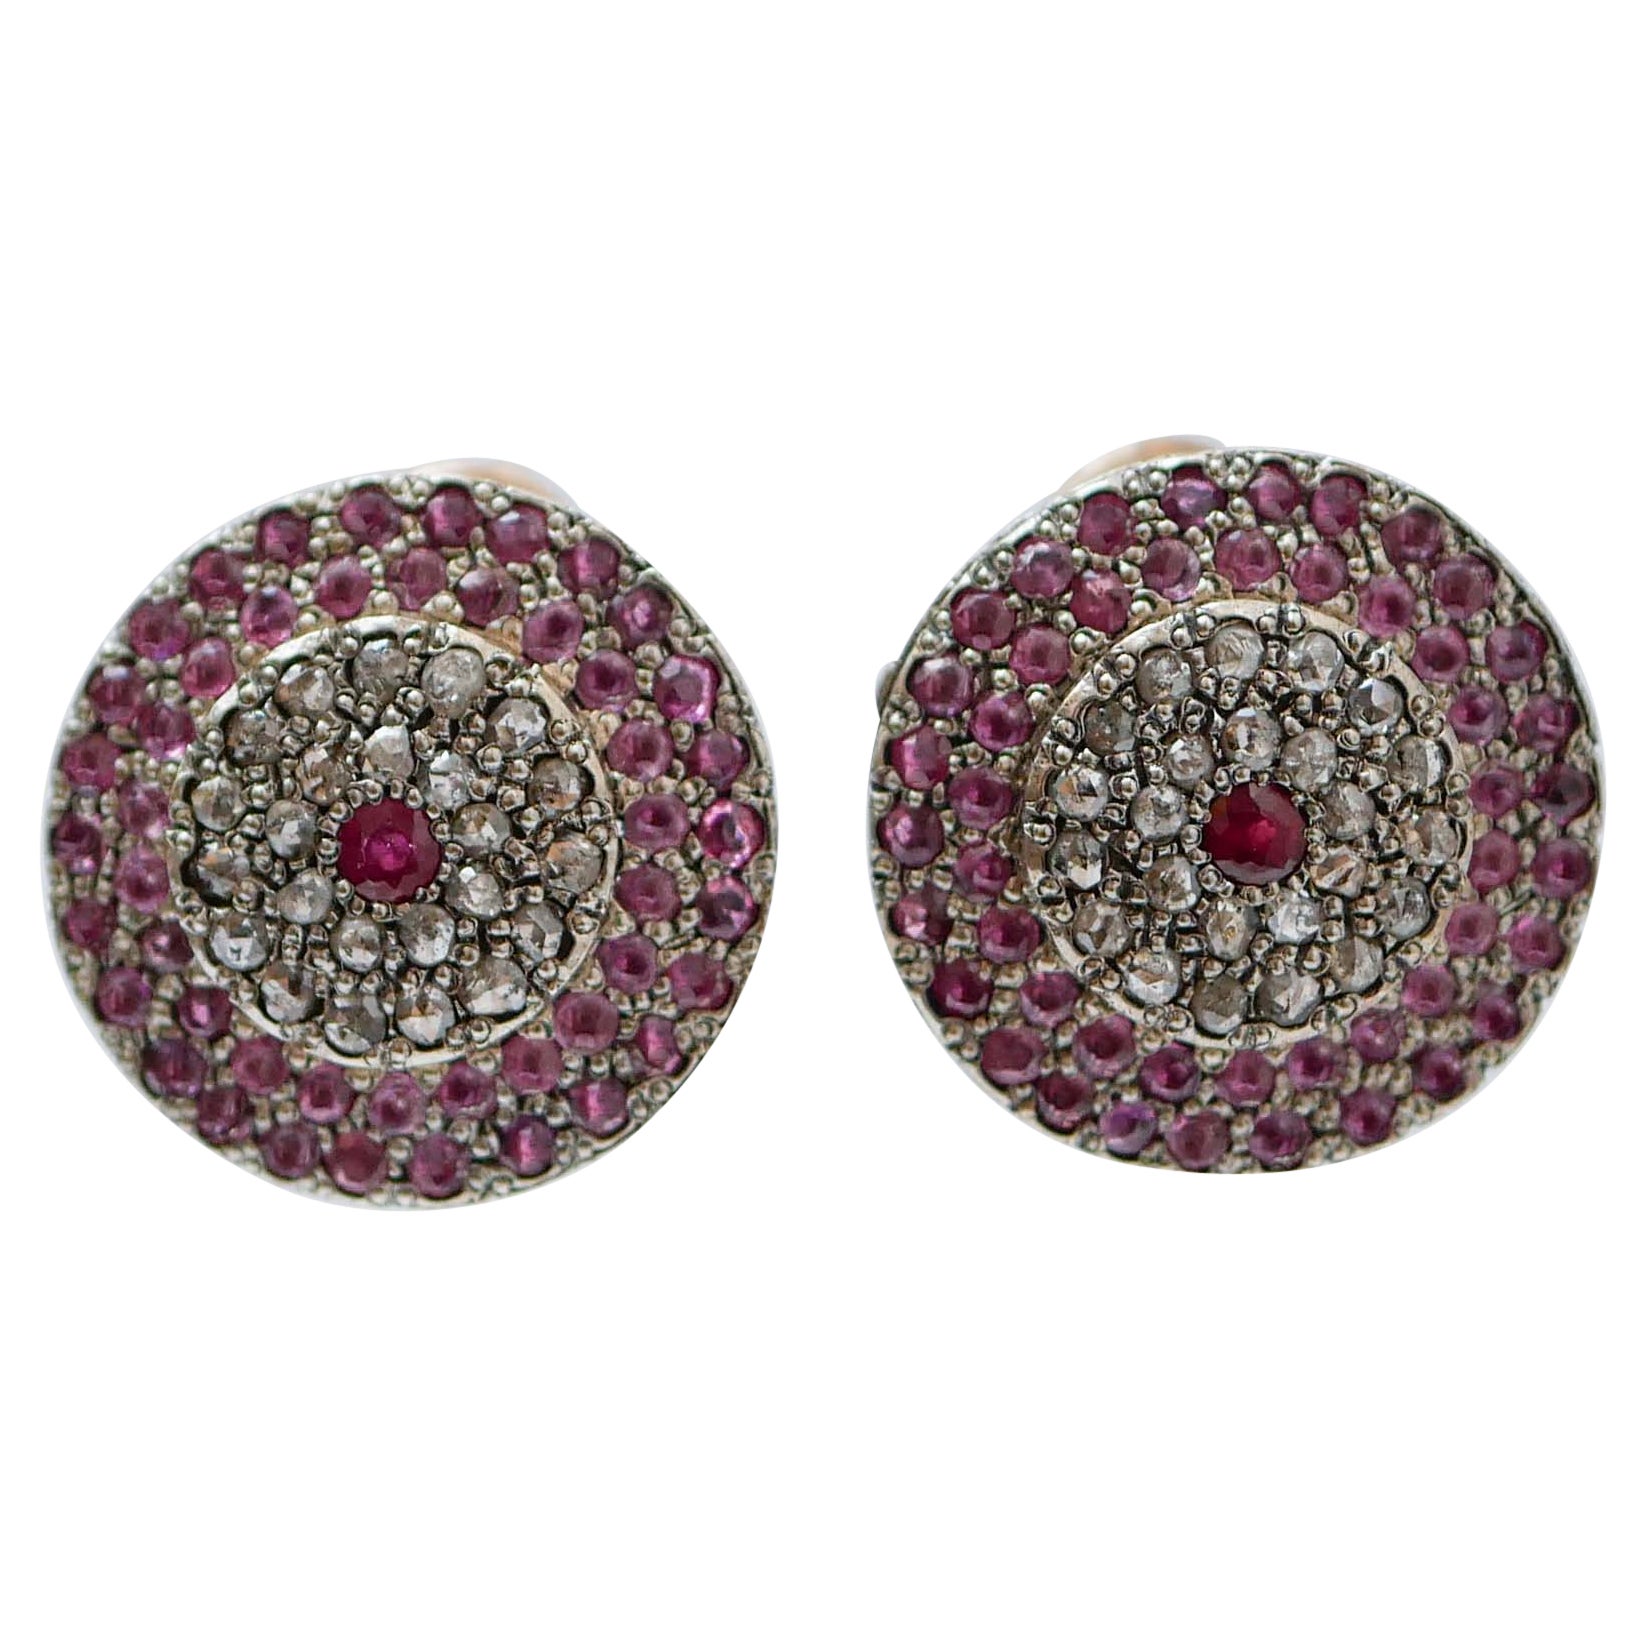 Rubies, Diamonds, Rose Gold and Silver Earrings For Sale